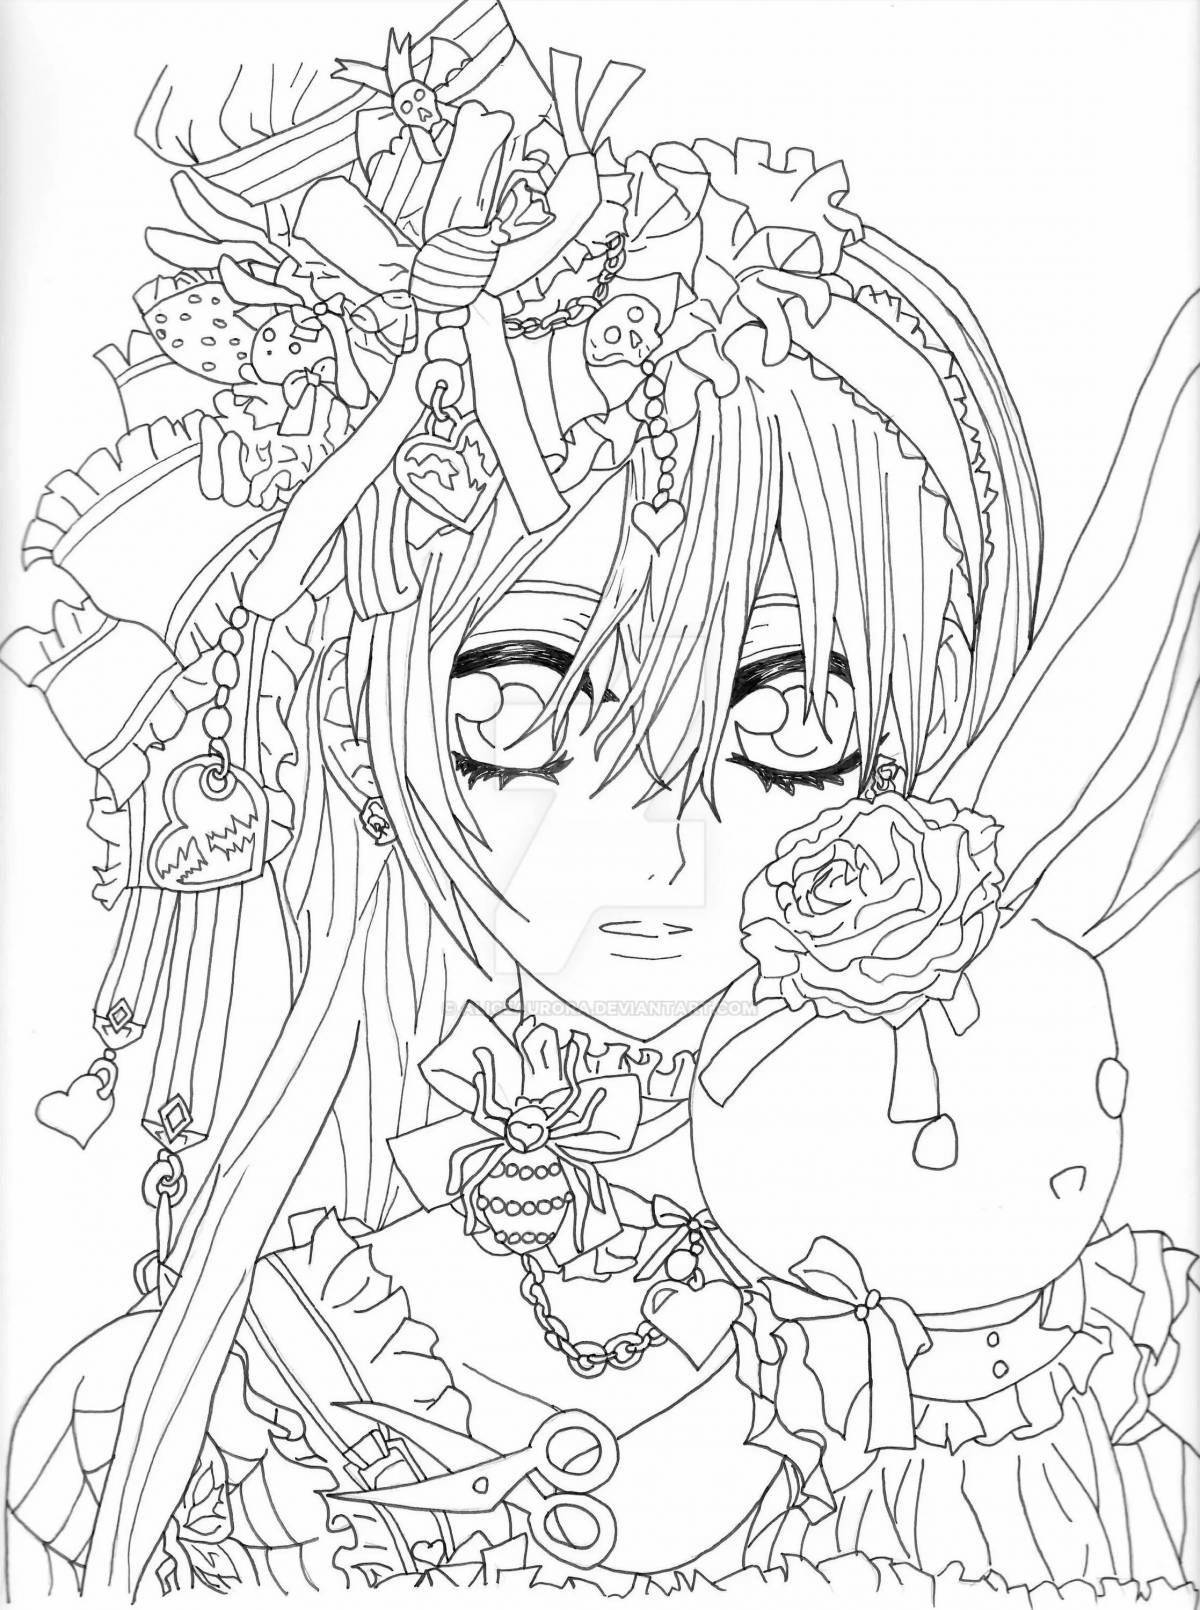 Obscene anime coloring page